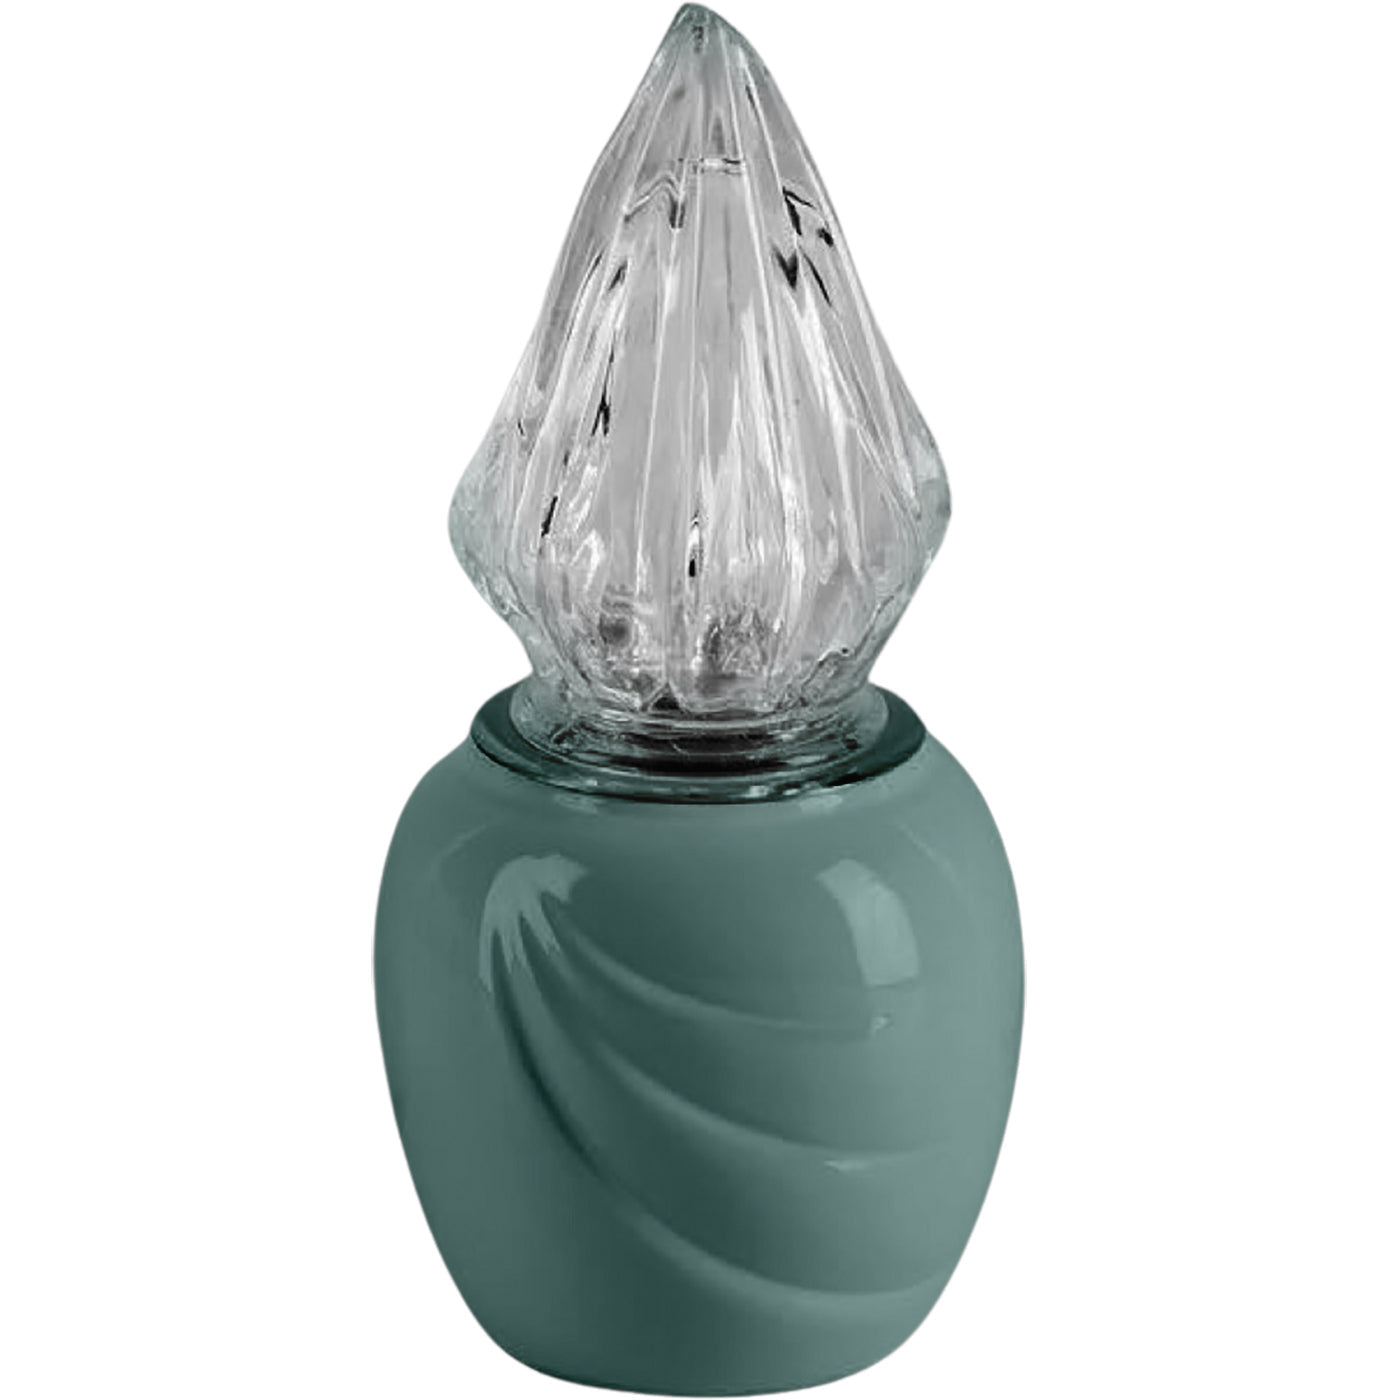 Grave light Ecotre green 10x10cm - 3.9x3.9in In green porcelain, ground attached ECO152T/V